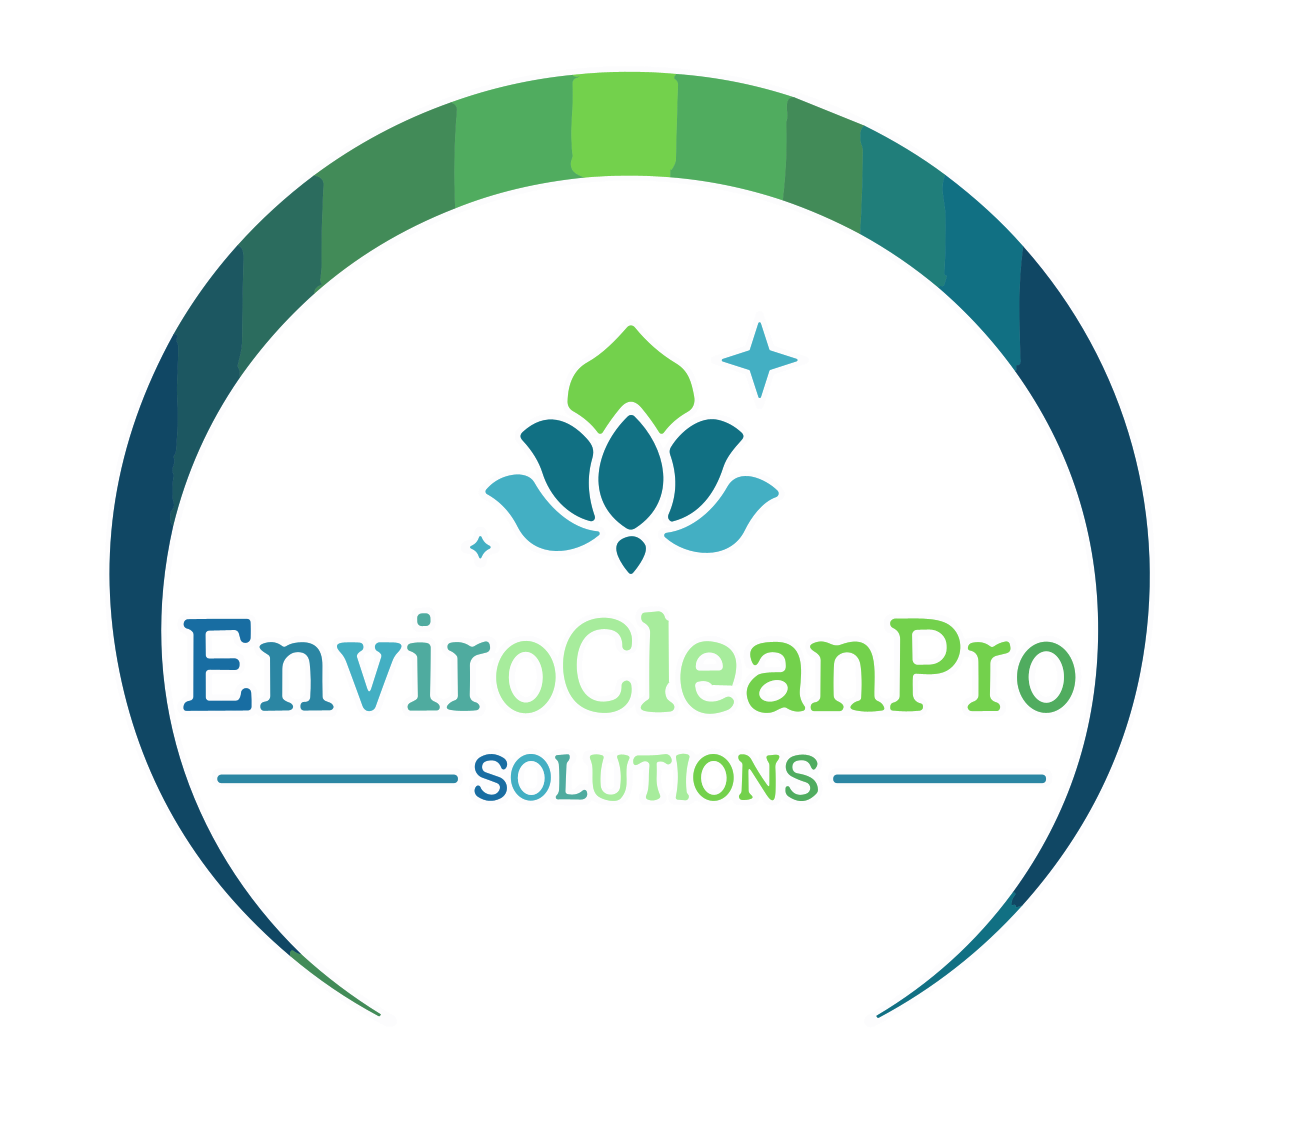 EnviroCleanPro Solutions offers services of General Office Cleaning, Carpet Care, Floor service, Fitnes Center and Gyms, Daycares and Schools, Hospital clean in El Segundo, North Hollywood, San Bernardino, Ventura, Beverly hills - General Office Cleaning